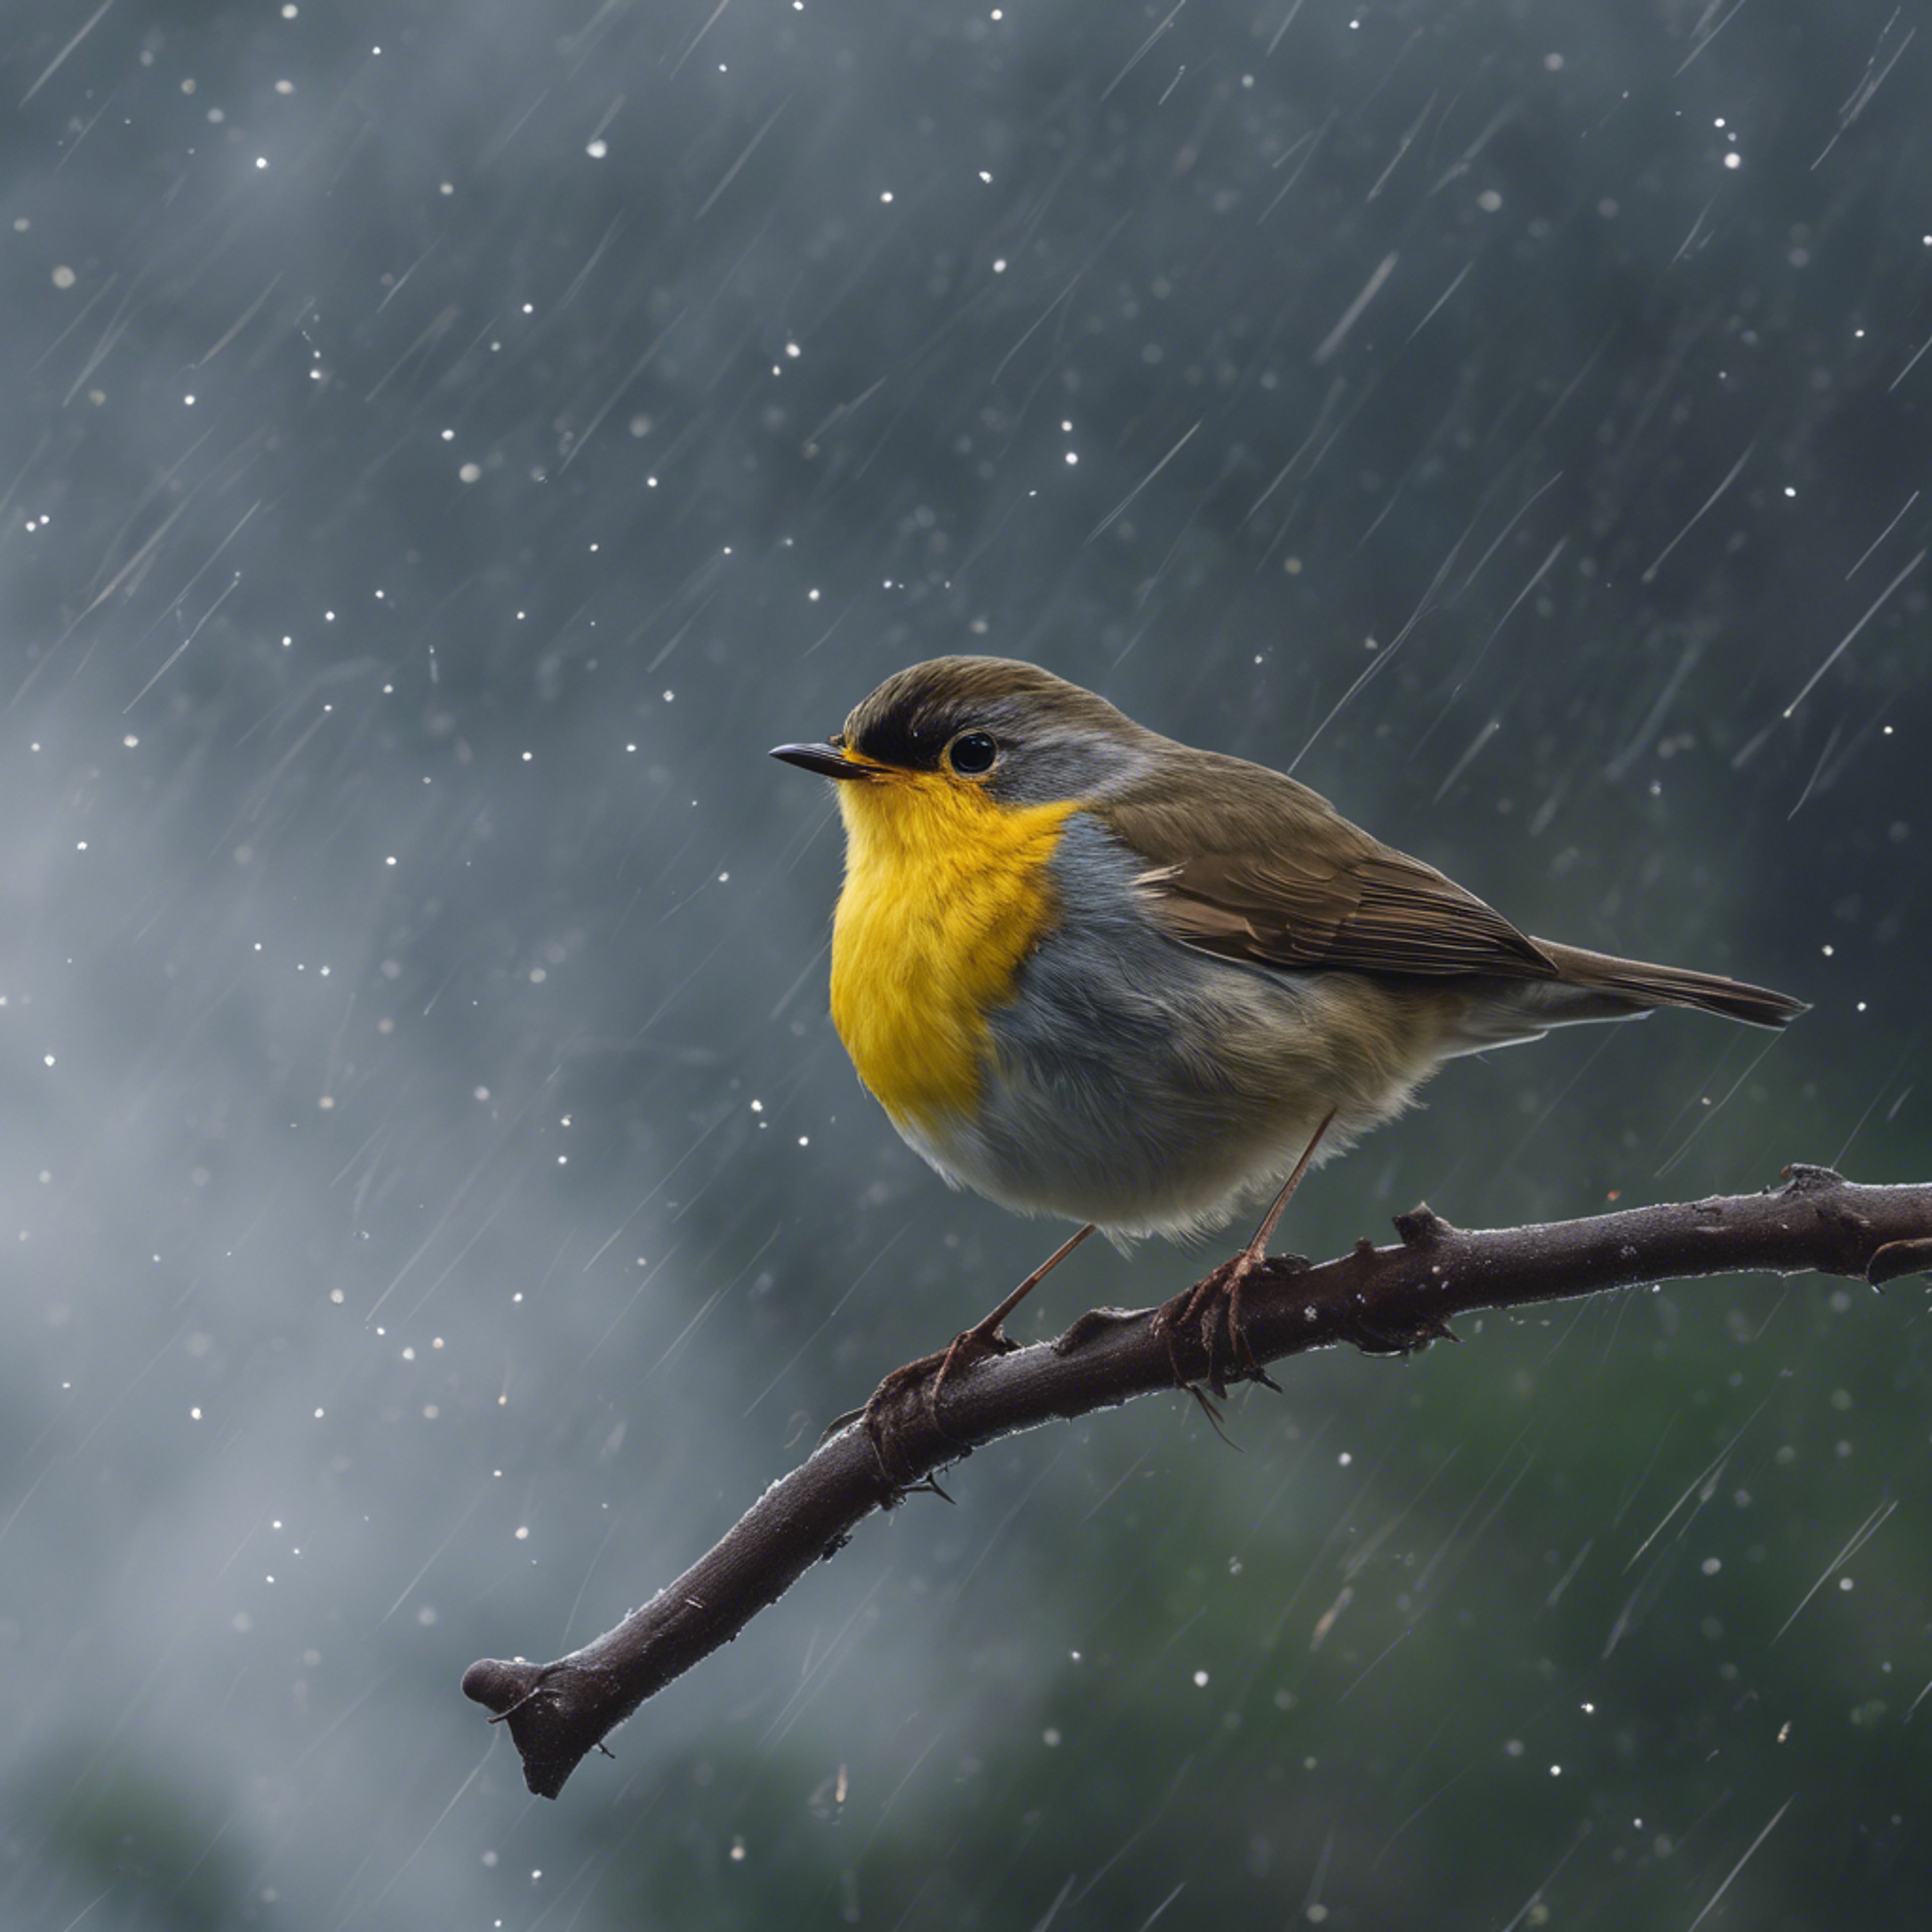 A yellow-breasted robin in mid-flight against a dark, stormy sky. Шпалери[14716aee78274faeac04]